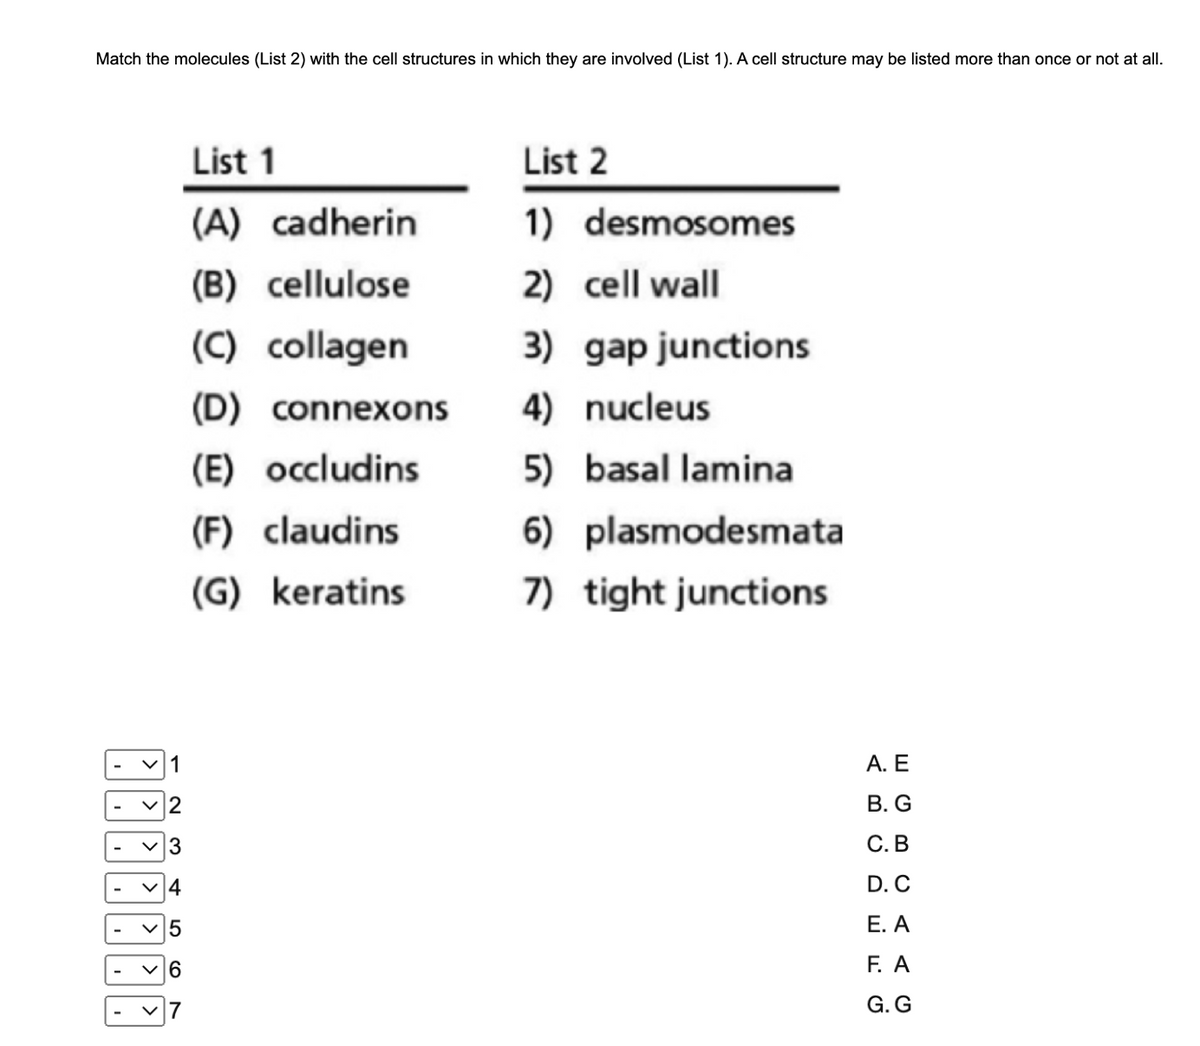 Match the molecules (List 2) with the cell structures in which they are involved (List 1). A cell structure may be listed more than once or not at all.
List 1
List 2
(A) cadherin
1) desmosomes
(B) cellulose
2) cell wall
(C) collagen
3) gap junctions
(D) connexons
4) nucleus
(E) occludins
5) basal lamina
(F) claudins
6) plasmodesmata
(G) keratins
7) tight junctions
A. E
В. G
С. В
D. C
Е. А
v6
F. A
V7
G. G
4-
